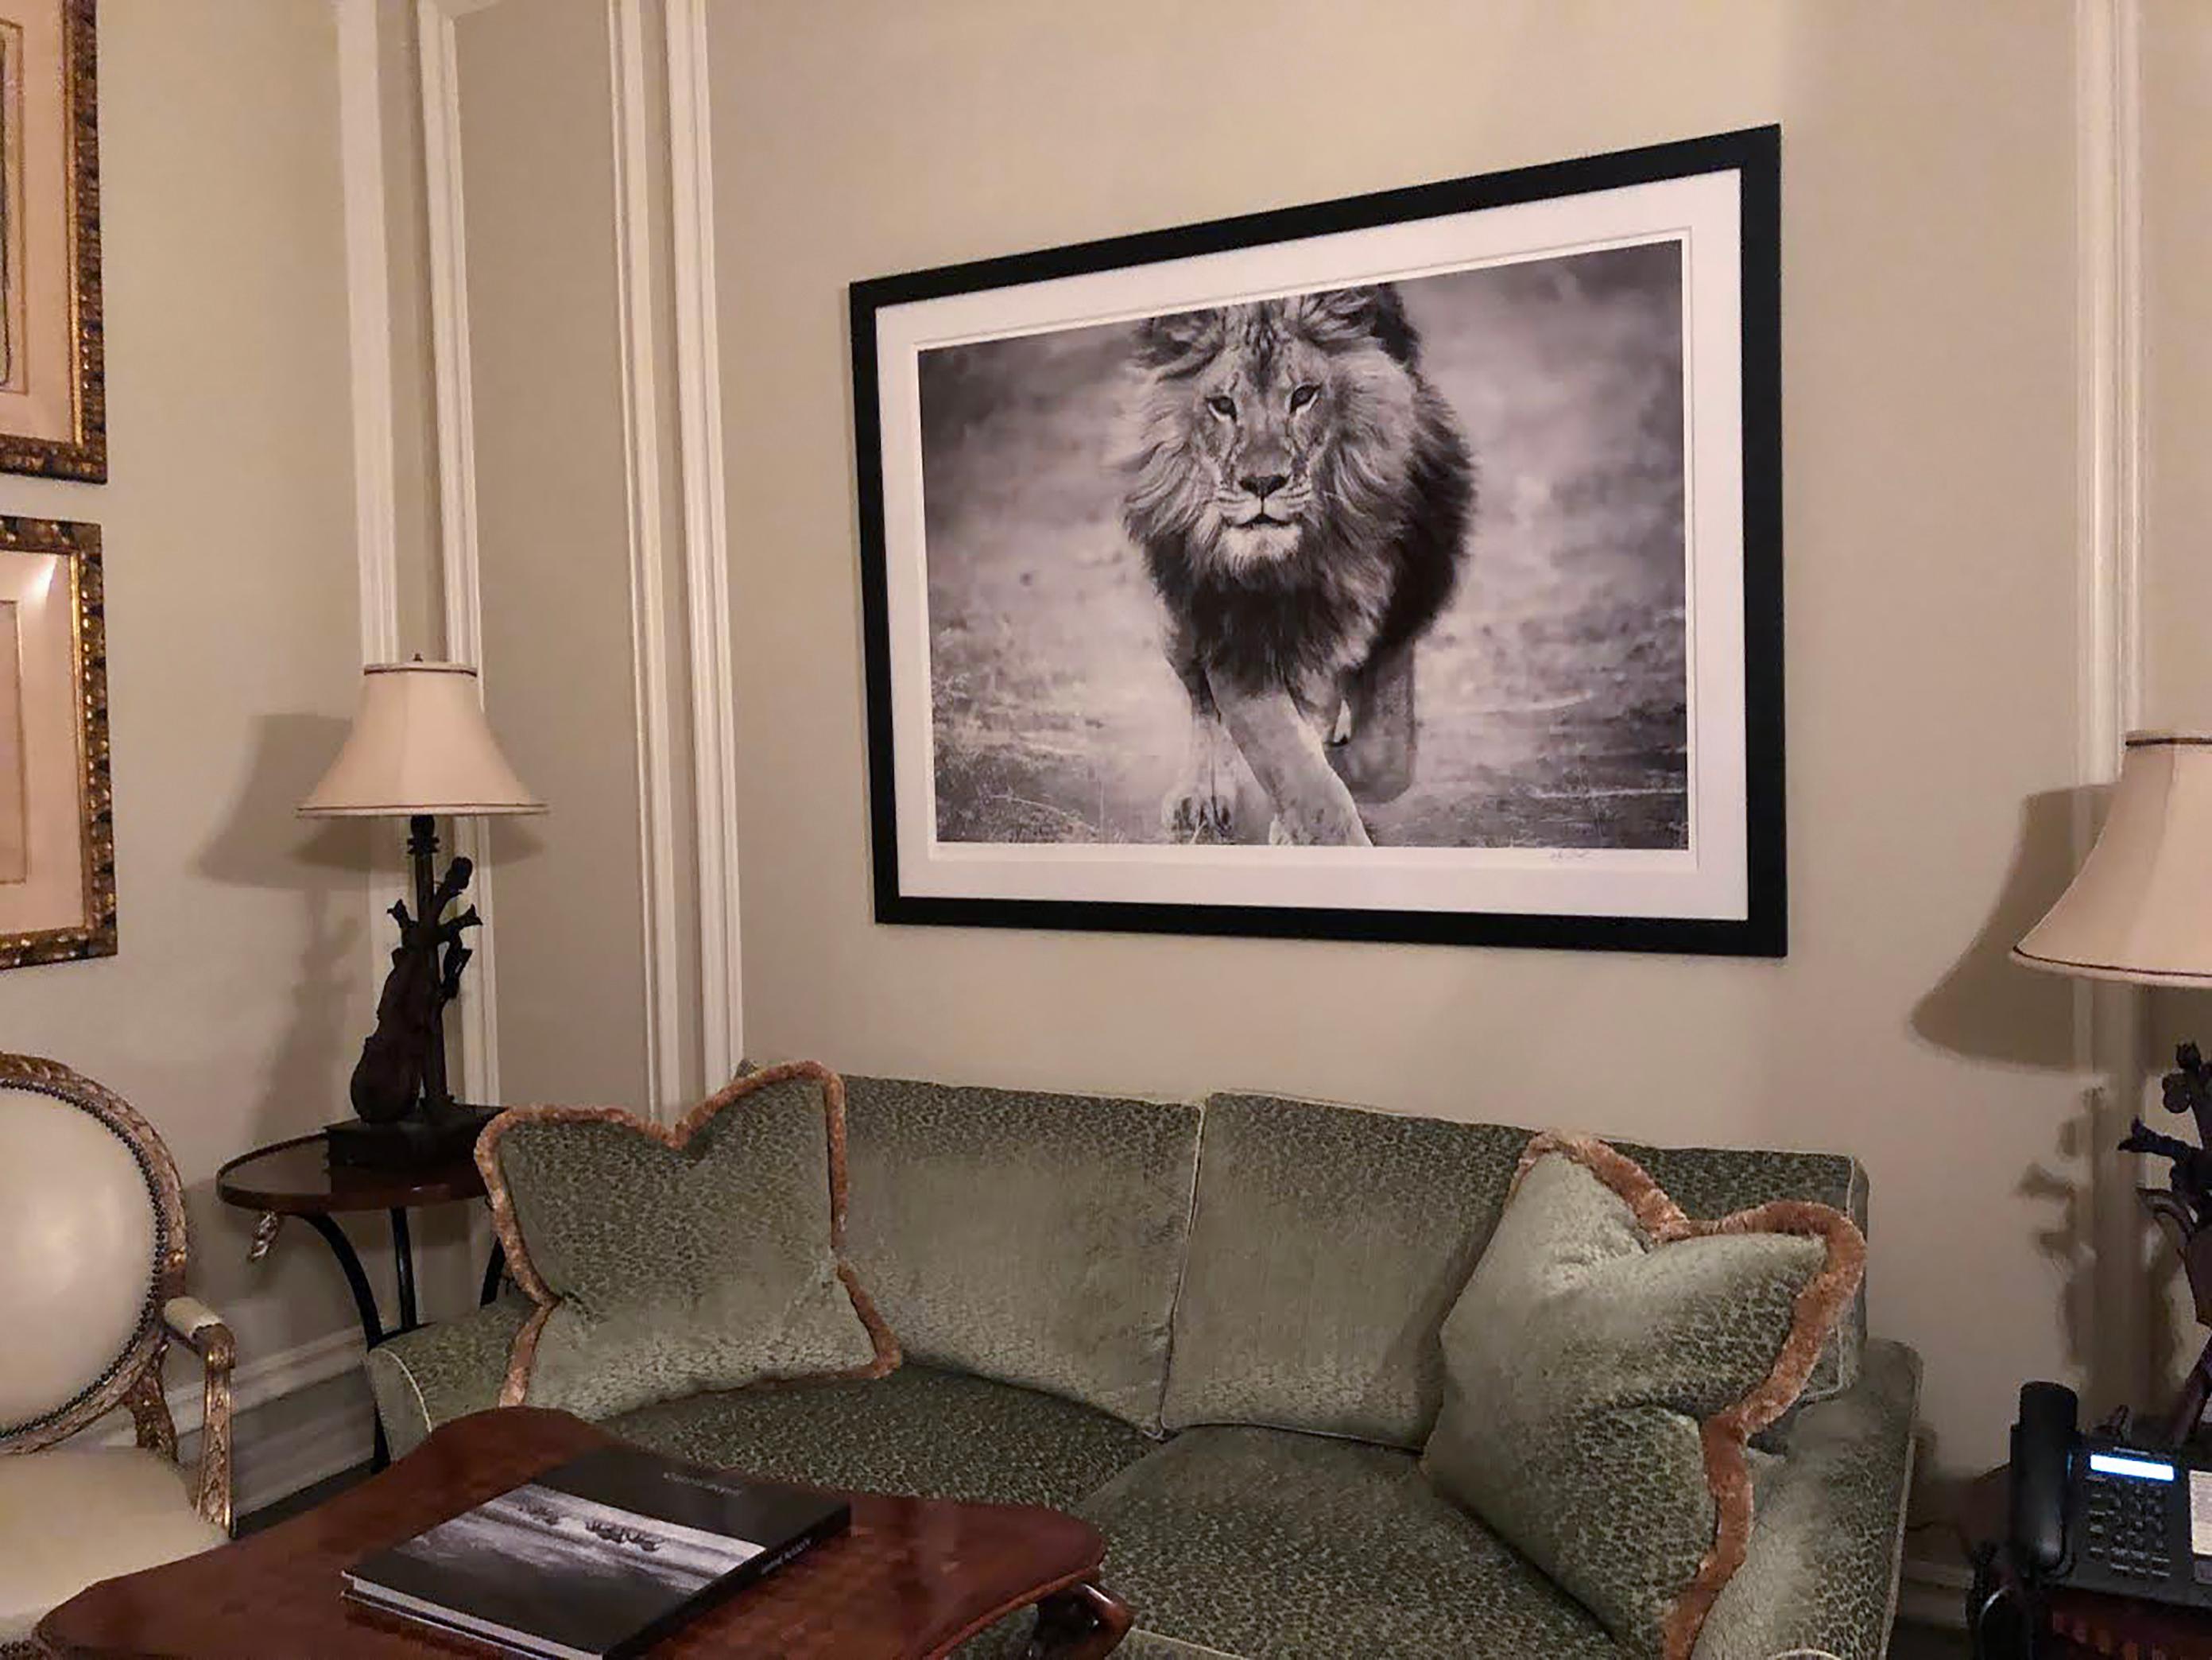 36x48 Black and White Lion Photography Unsigned Test Print, Africa Wildlife - Gray Black and White Photograph by Shane Russeck